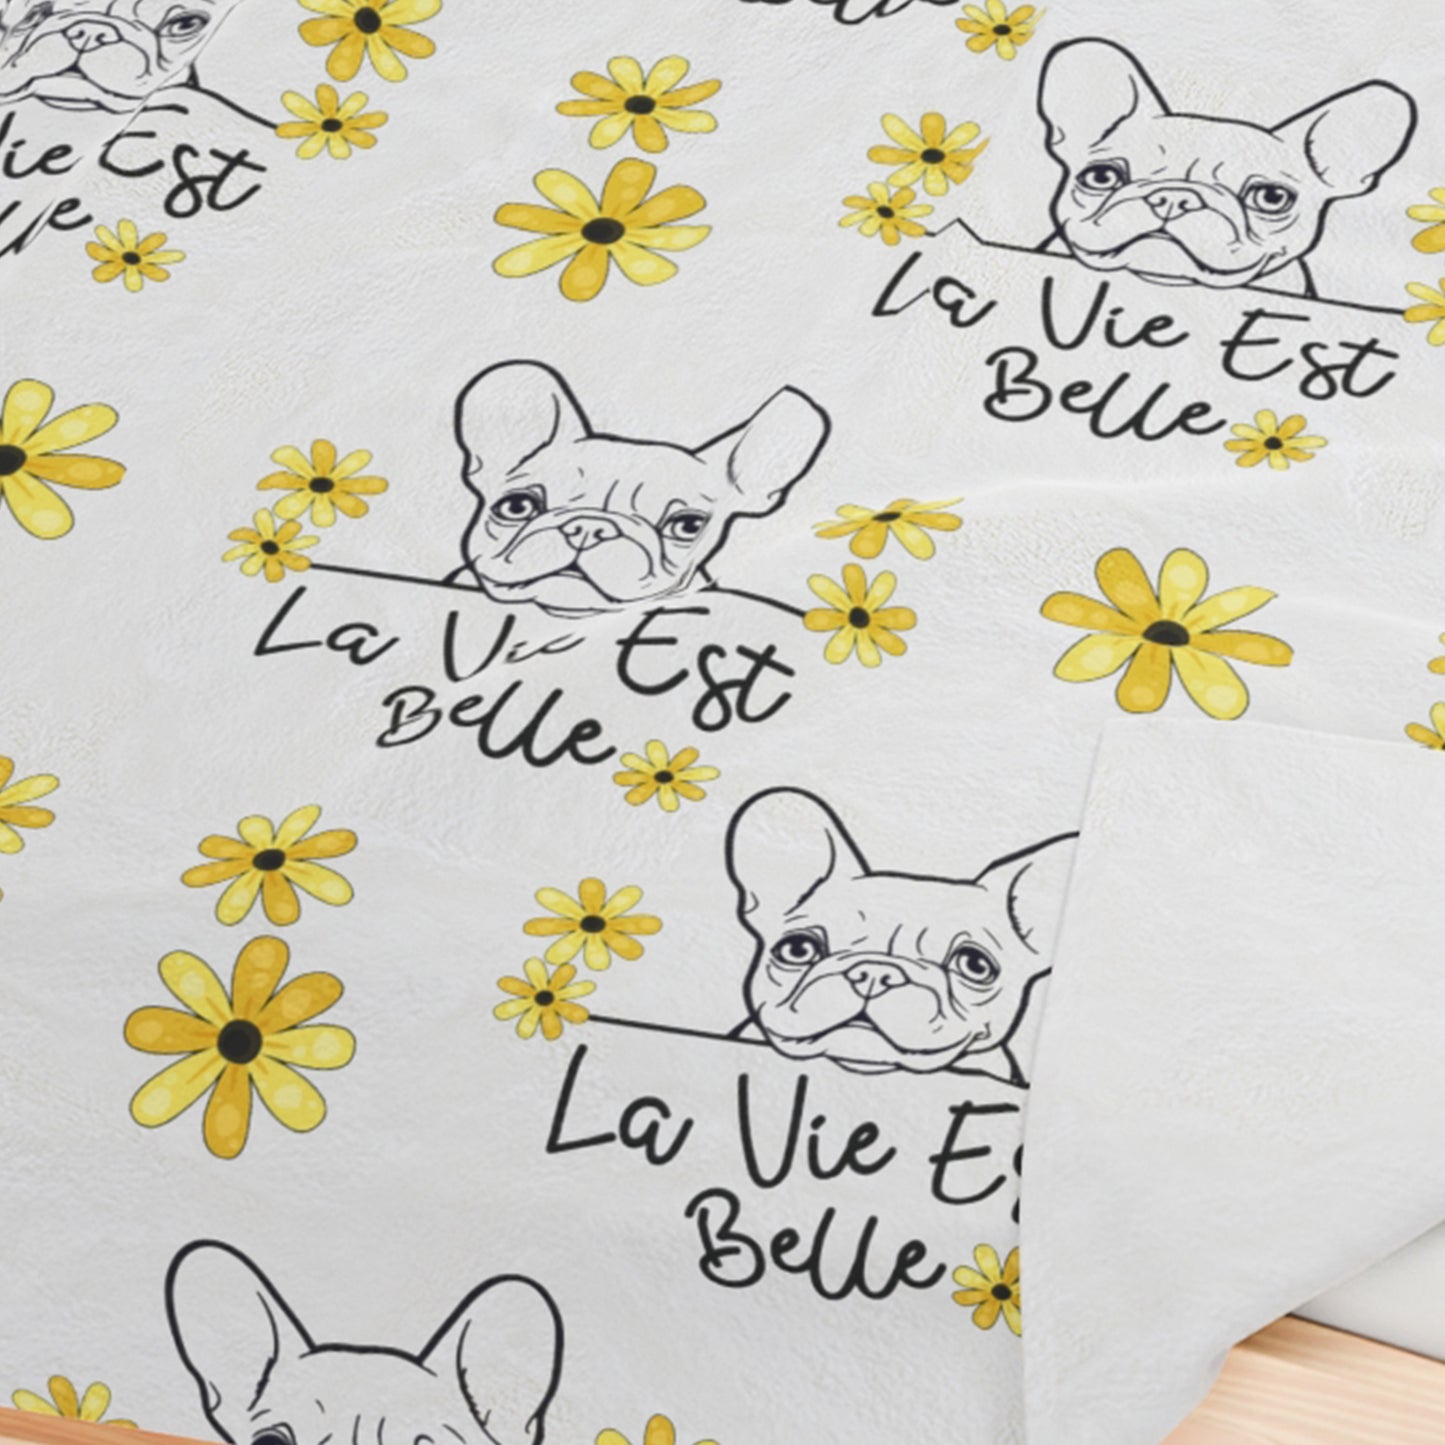 a pair of french bulldogs with yellow flowers on them